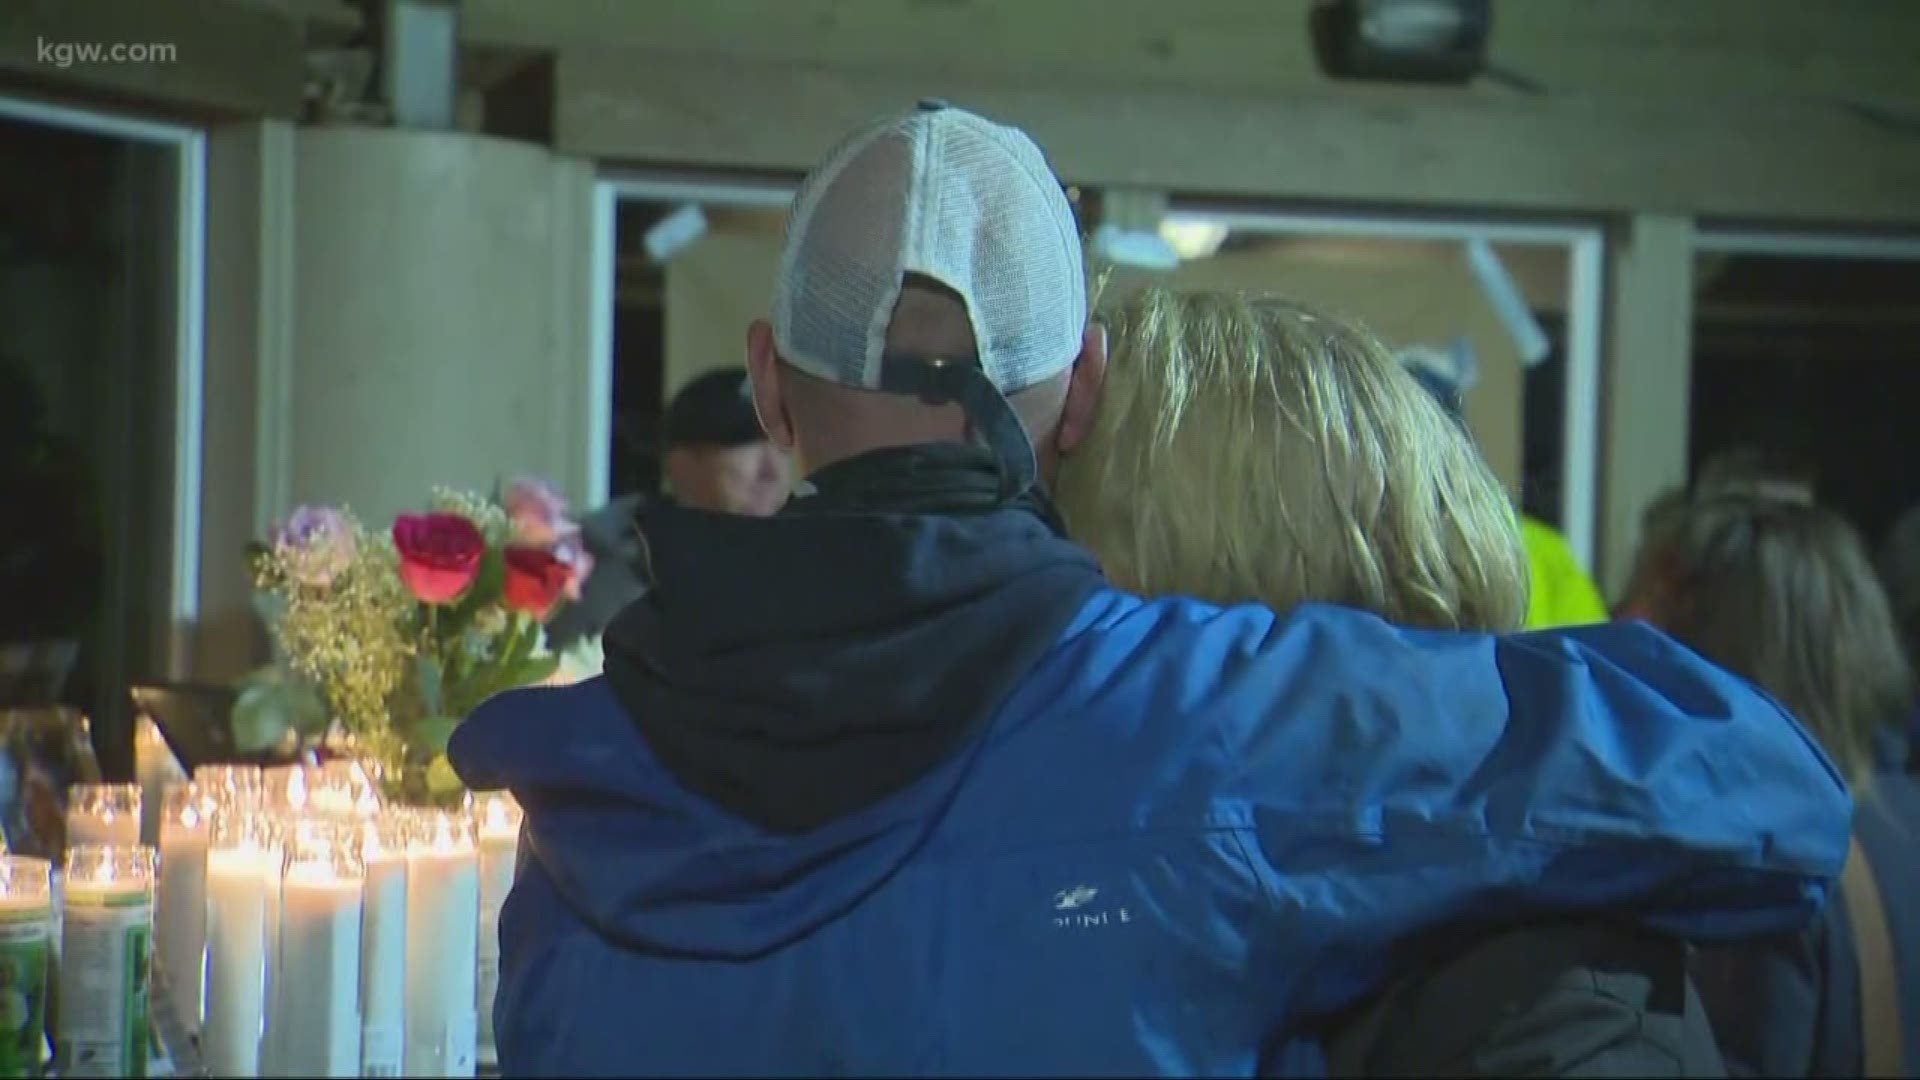 Friends and family held a vigil to remember fisherman killed at sea.